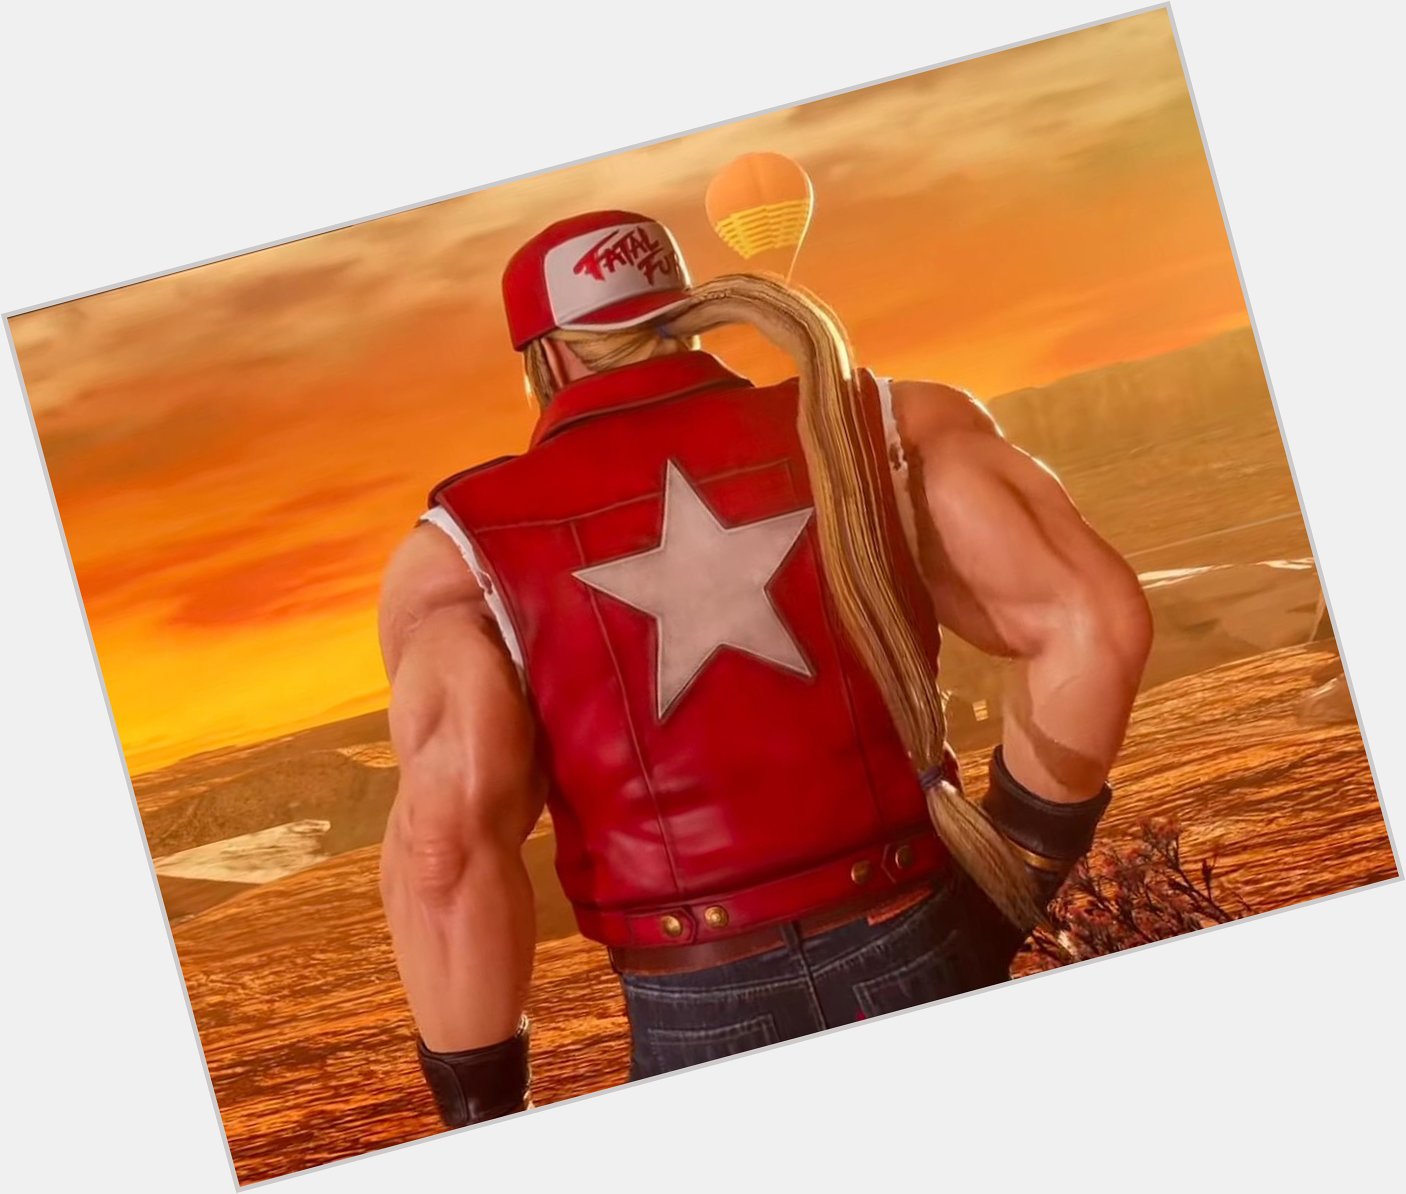 Wish terry bogard a happy birthday or your mother will die in her sleep tonight 